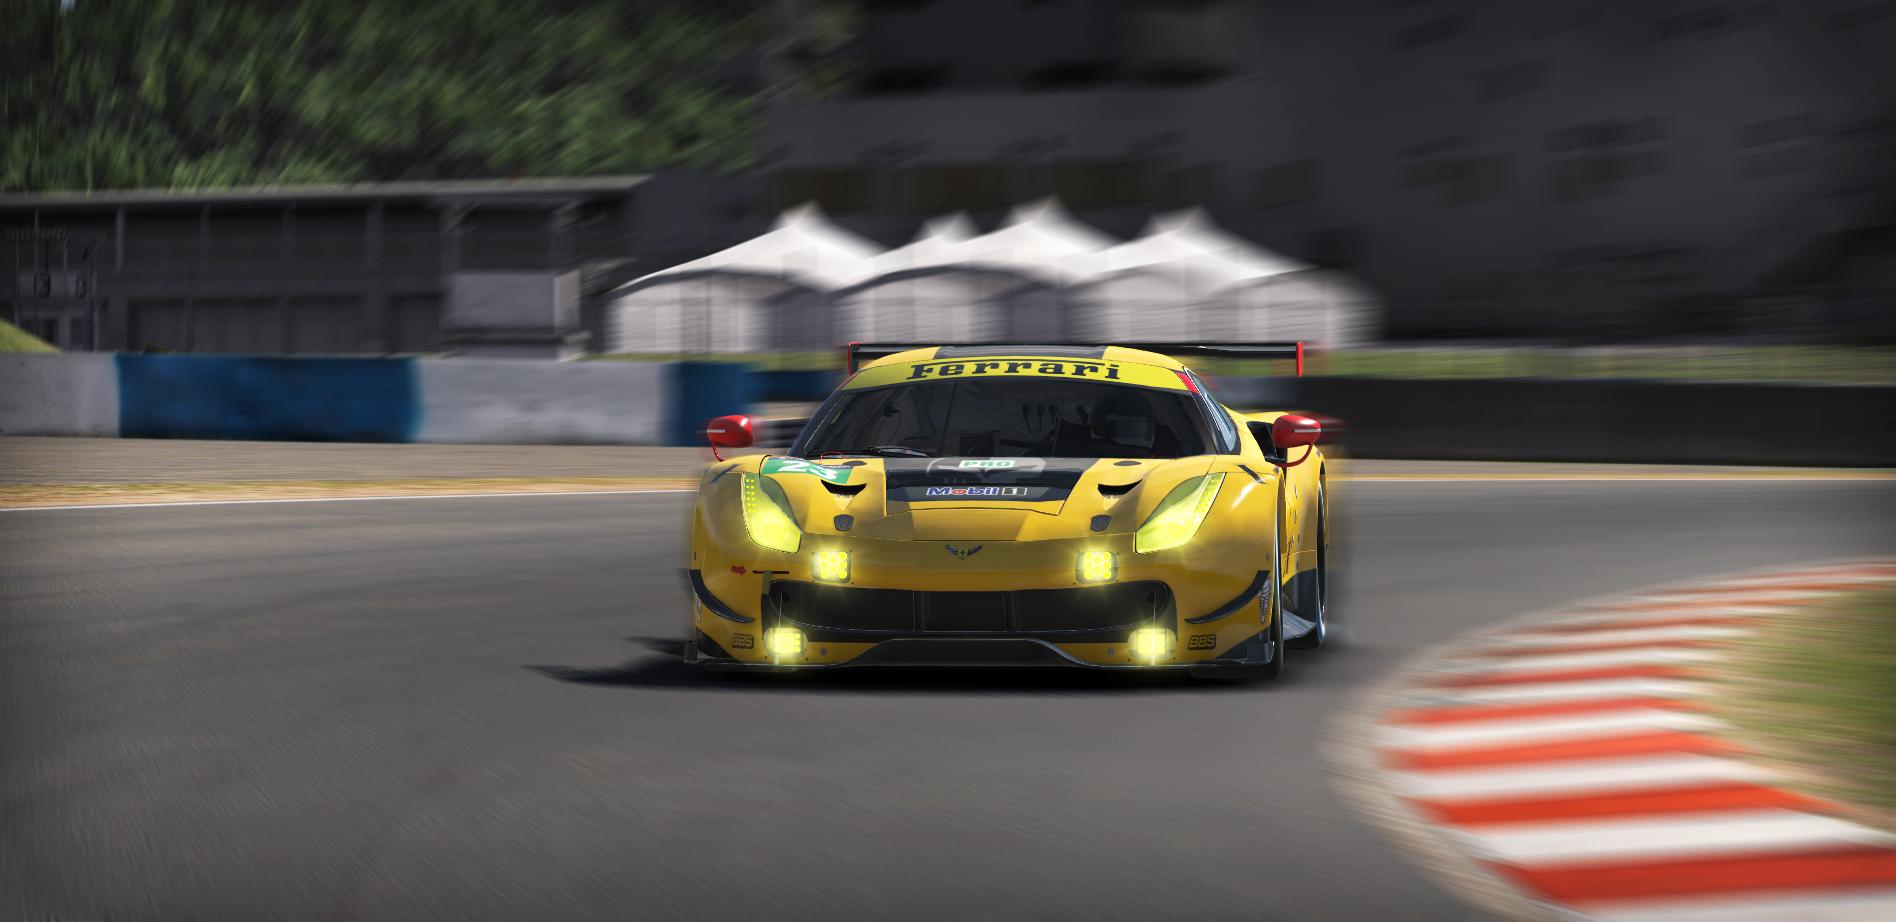 Preview of Corvette C7R by Thomas Engelns